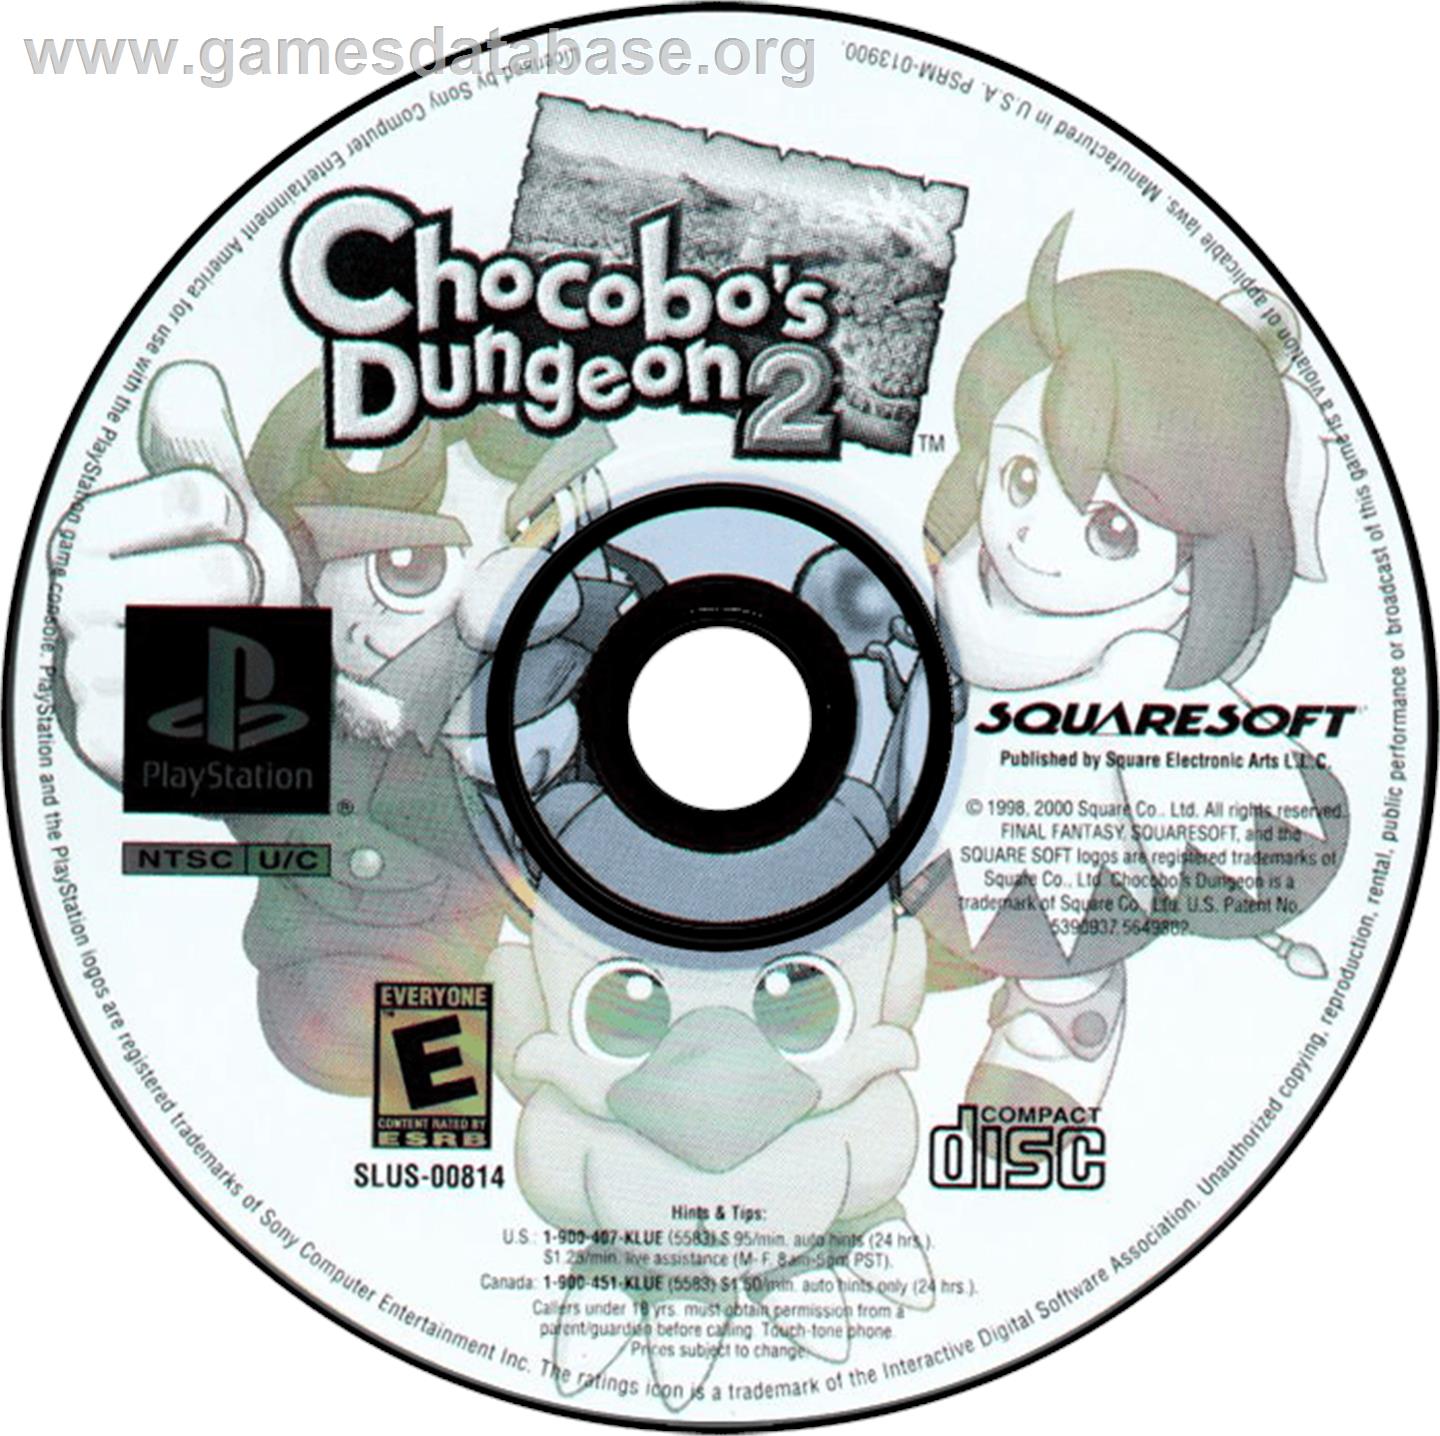 Chocobo's Dungeon 2 - Sony Playstation - Artwork - Disc